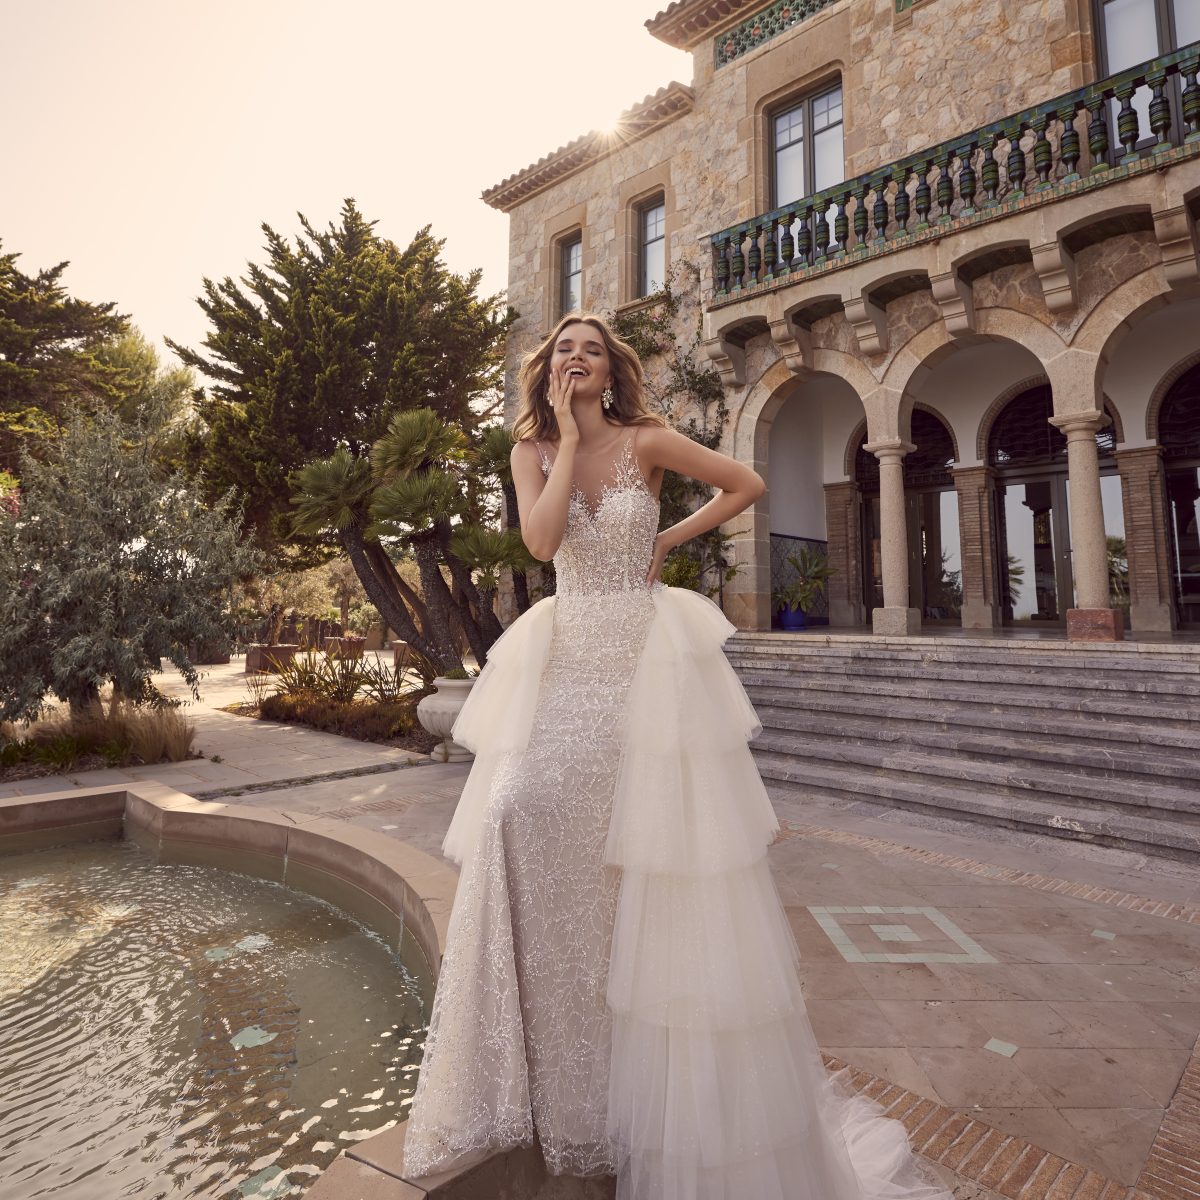 Ronald Joyce Dresses - Forget Me Not Bridal Boutique - Indisputably Stunning